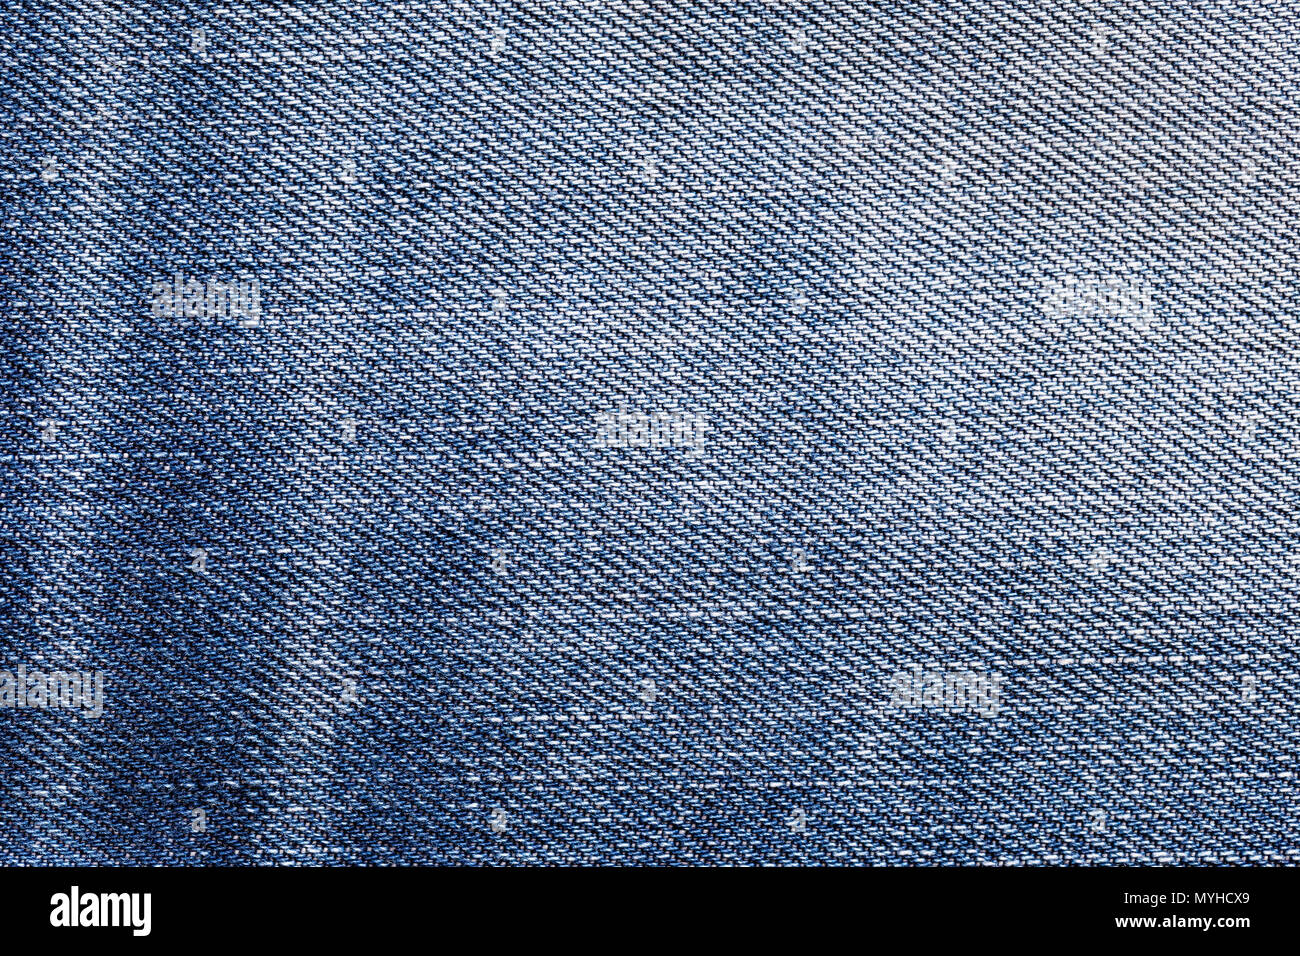 Denim jeans fabric texture background for clothing, fashion design and  industrial construction concept Stock Photo - Alamy